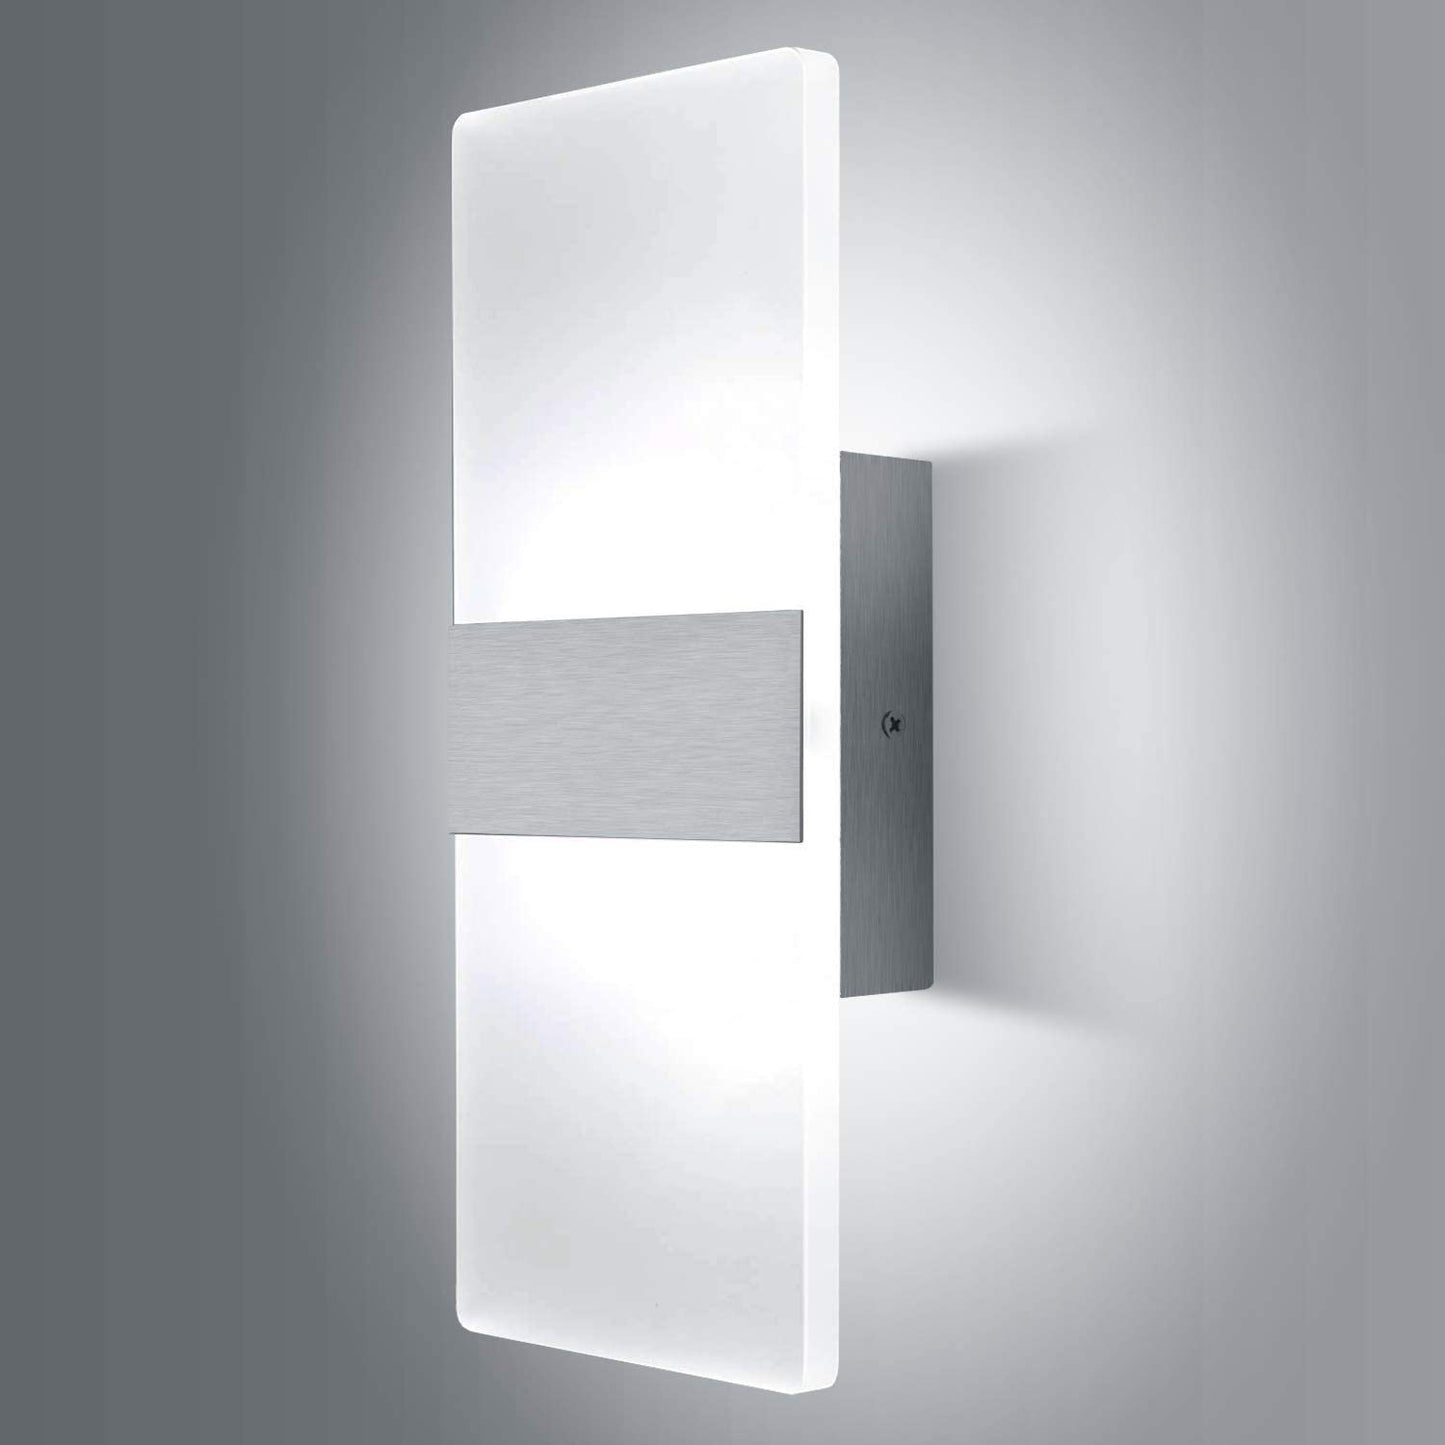 Lightess Modern Wall Sconce Dimmable 12W, Up Down Wall Lights Acrylic LED Wall Lamp for Hallway Bedroom Corridor, Cool White, HS521-1